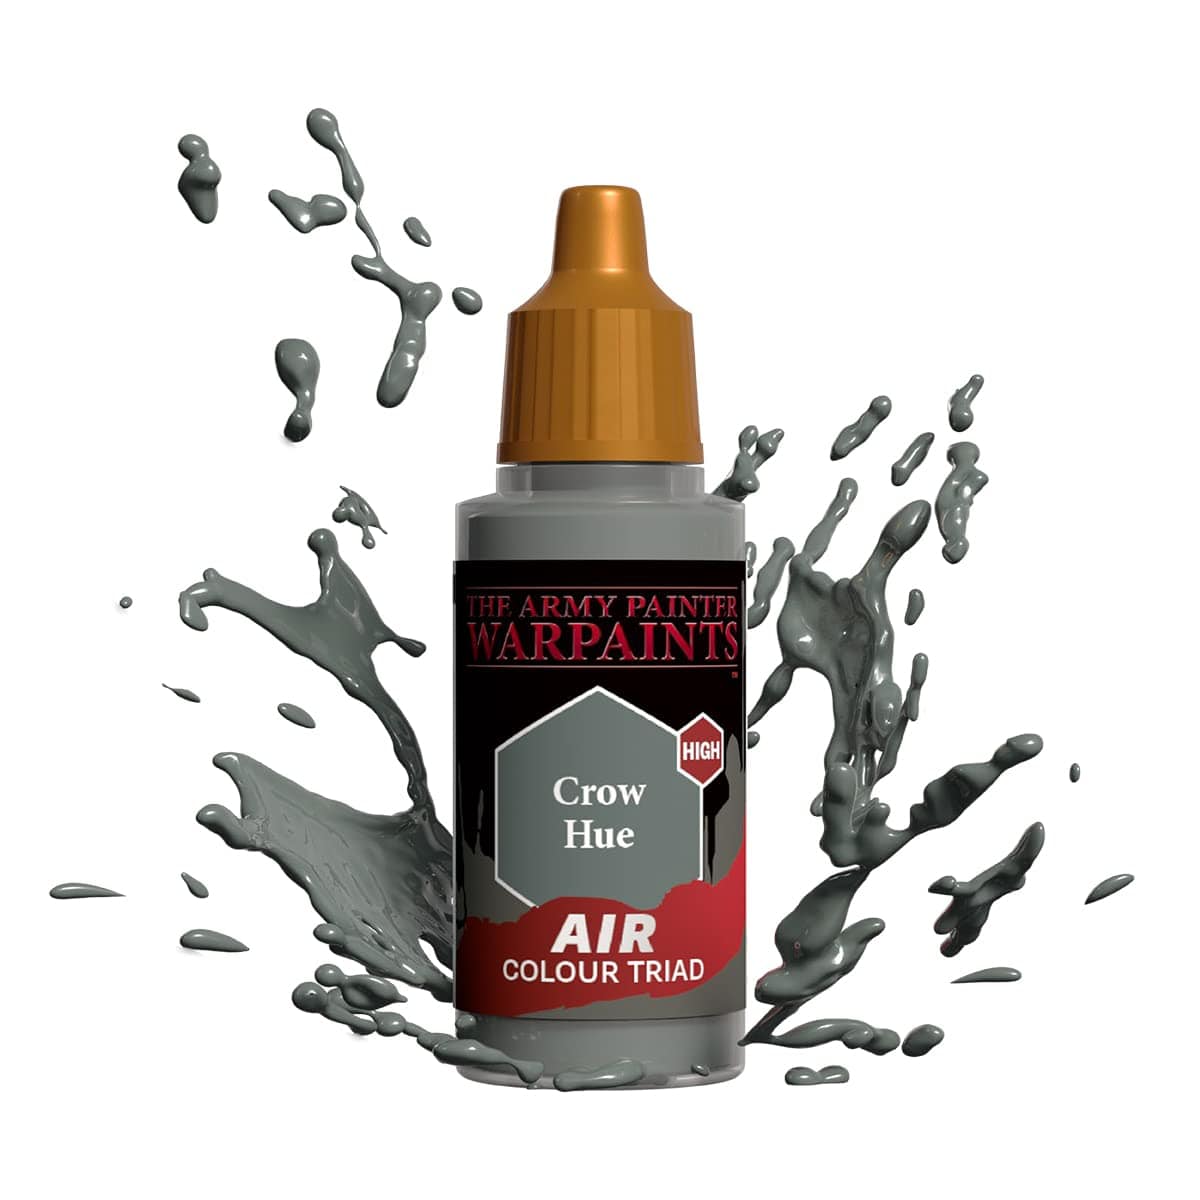 The Army Painter Warpaints Air: Crow Hue 18ml - Lost City Toys